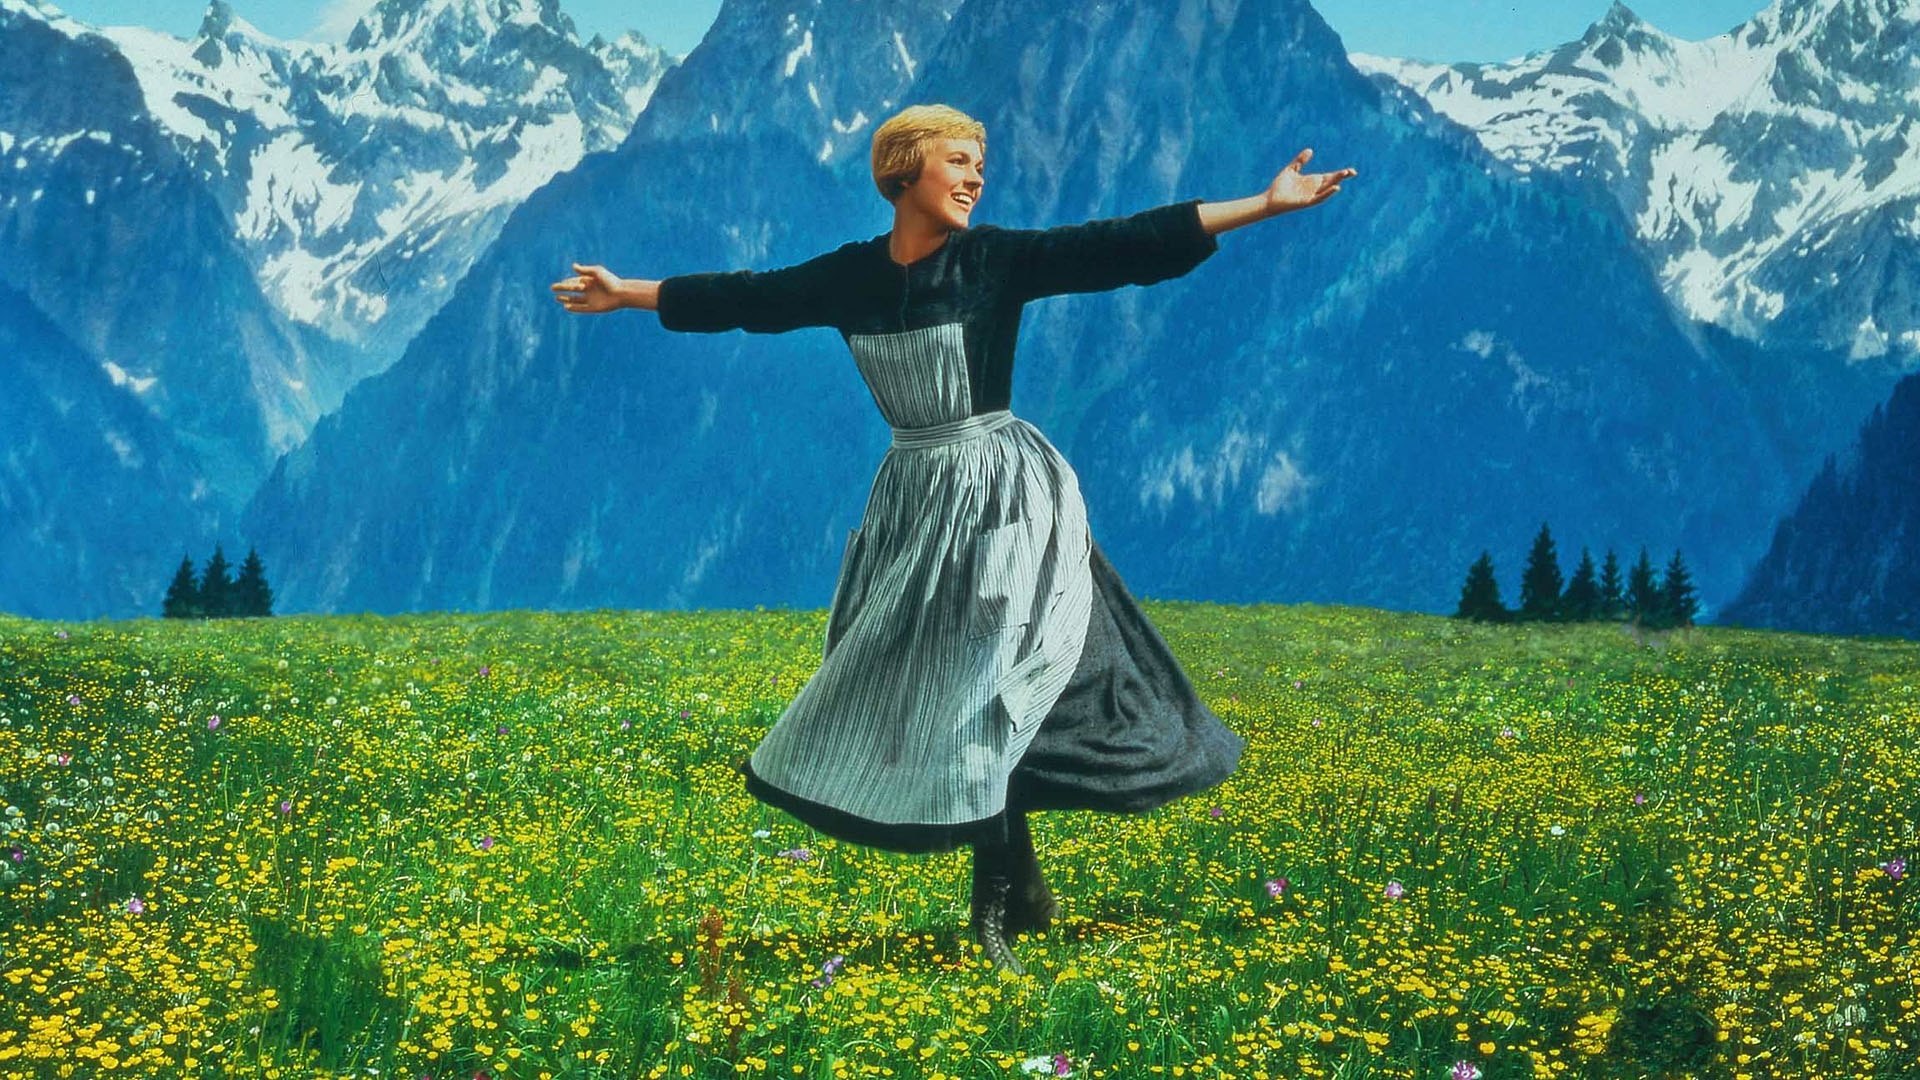 The Sound of Music 50th Anniversary Tribute (1965-2015)